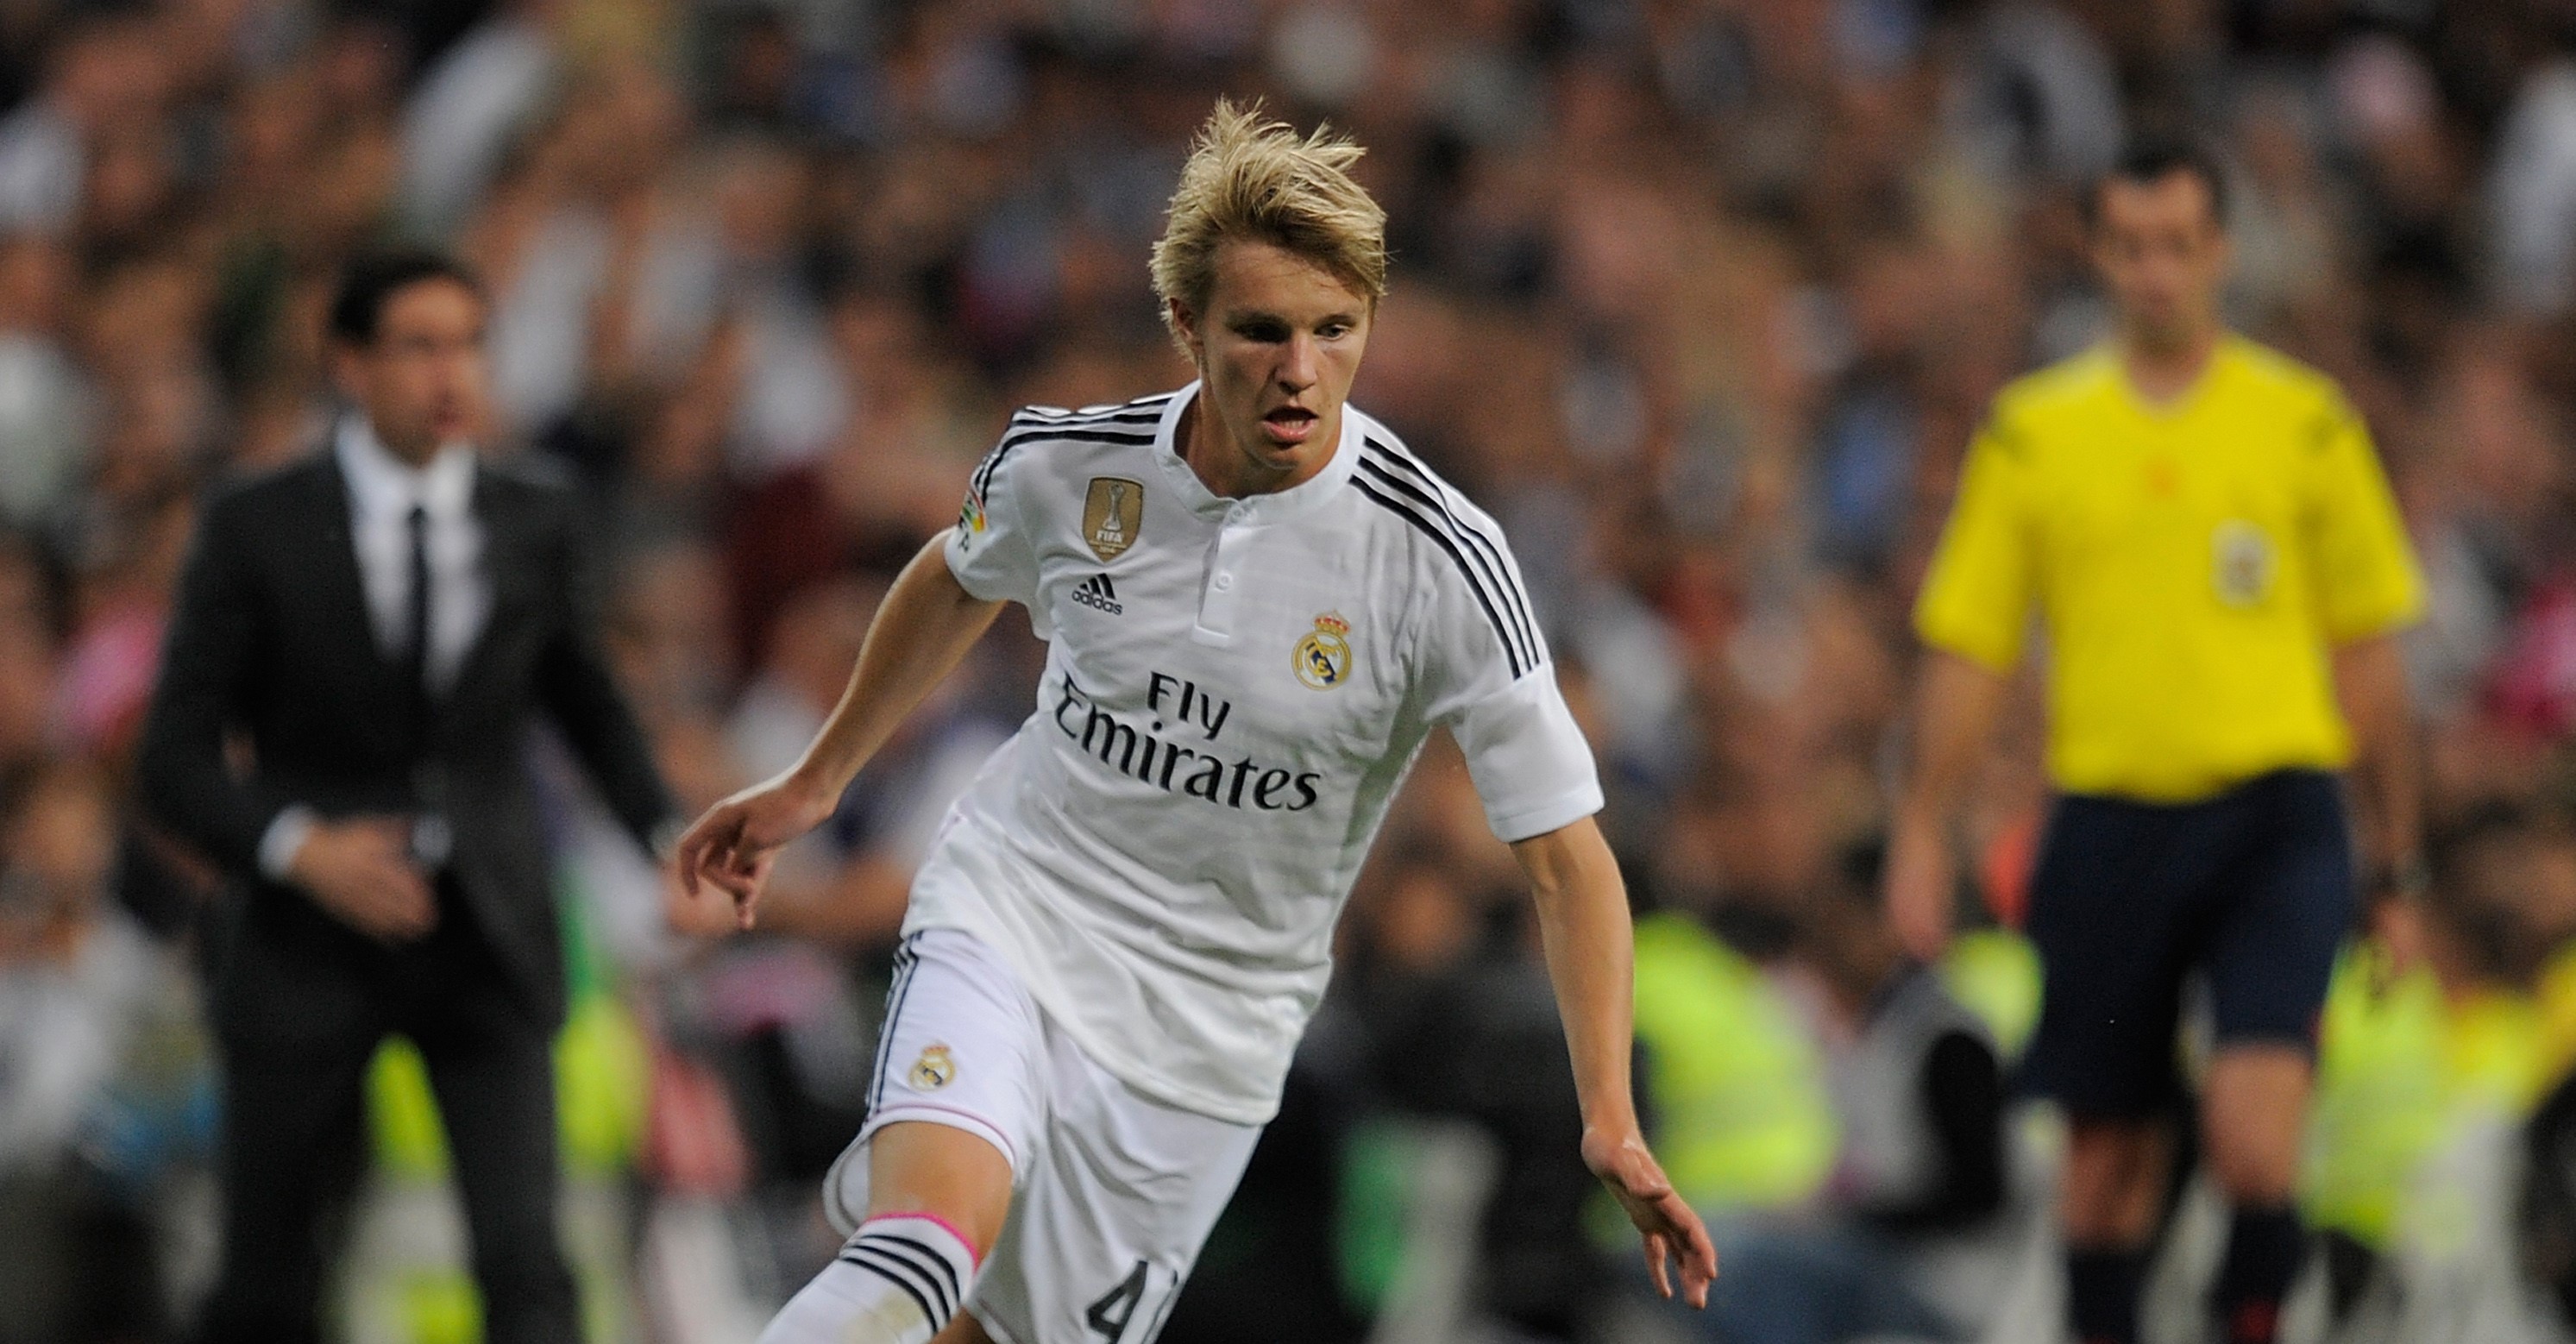 MADRID, SPAIN - MAY 23:  Martin Odegaard of Real Madrid in action during the La Liga match between Real Madrid CF and Getafe CF at Estadio Santiago Bernabeu on May 23, 2015 in Madrid, Spain.  (Photo by Denis Doyle/Getty Images)